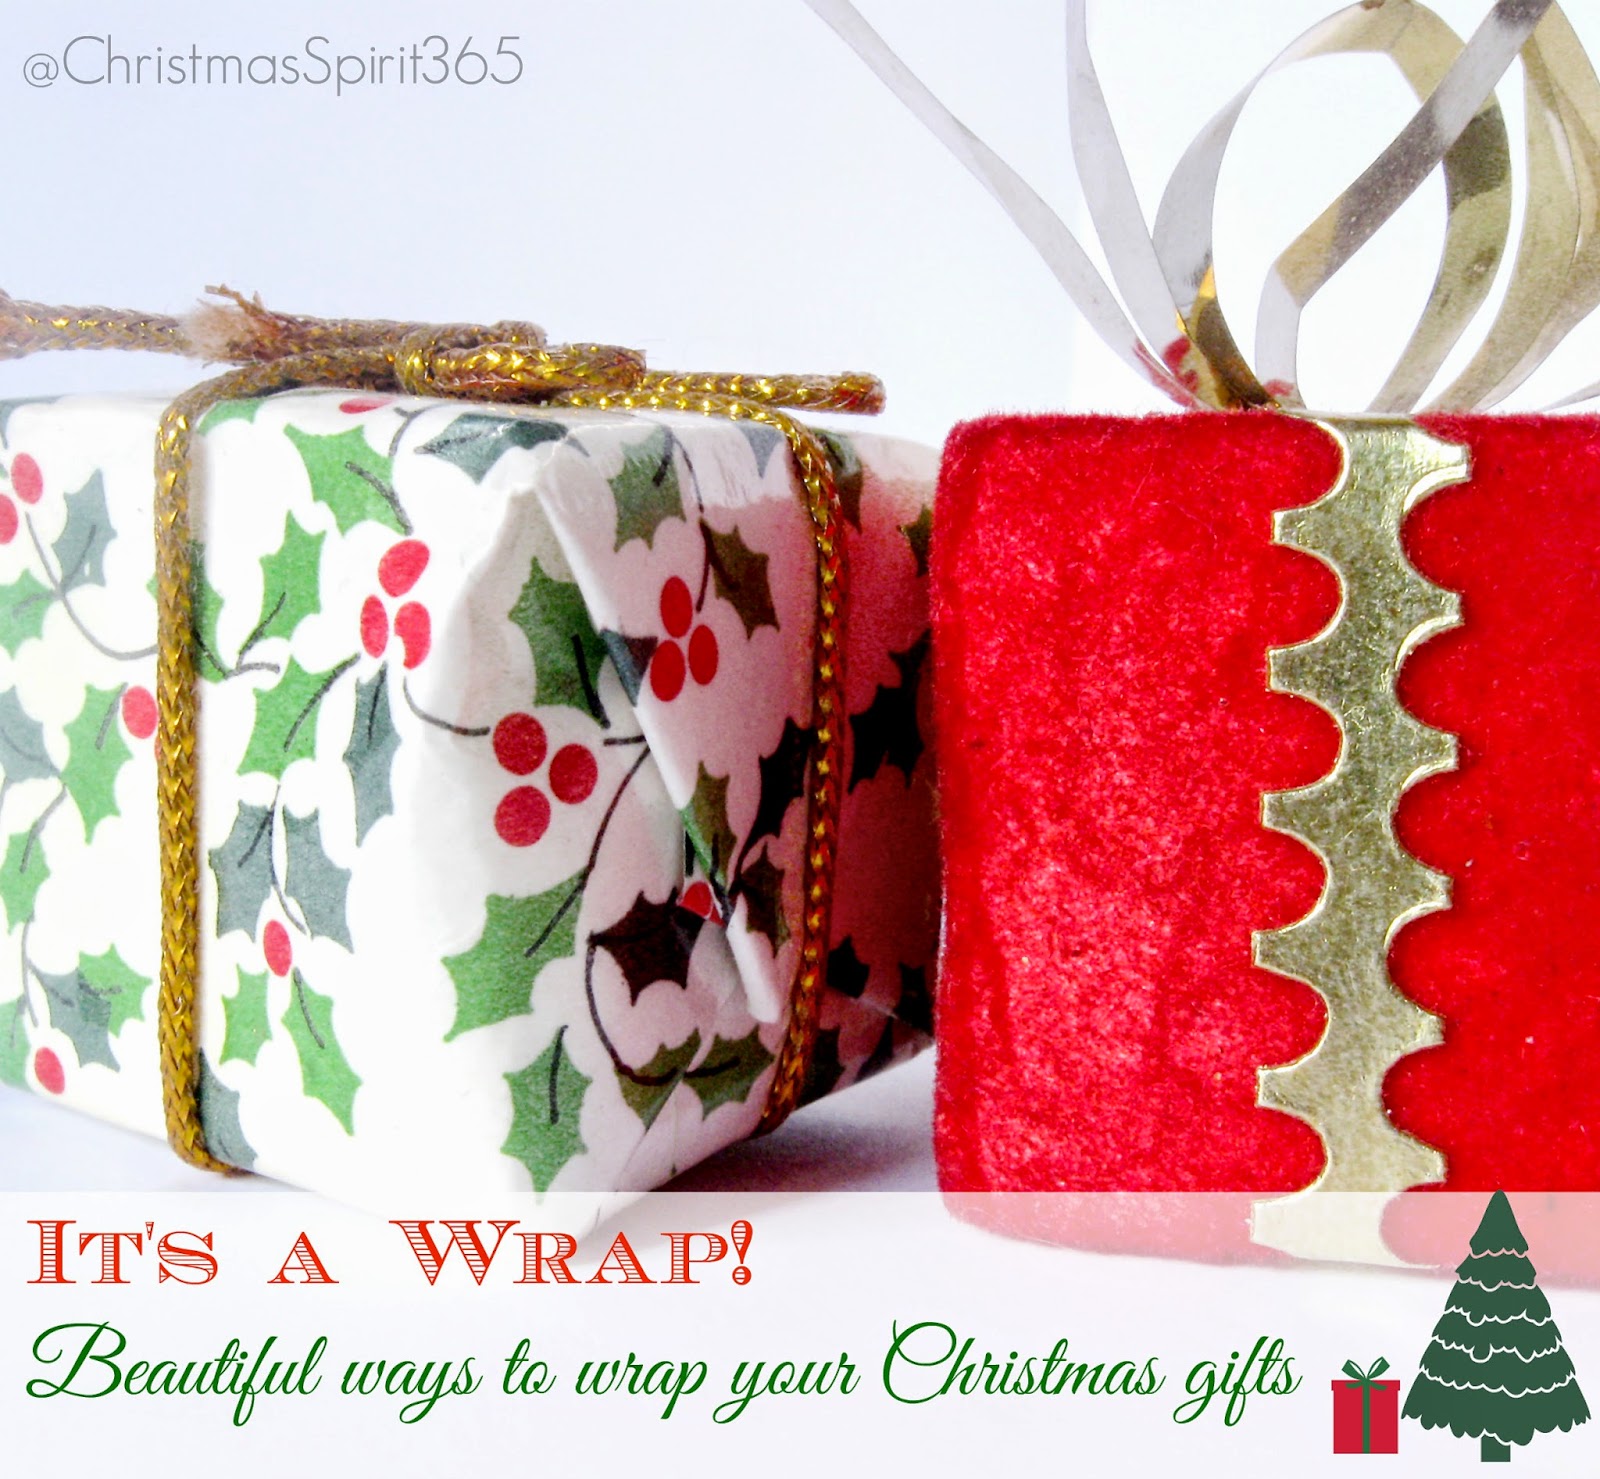 It's a Wrap: Interesting ways to wrap your Christmas and Holiday gifts (part 2)